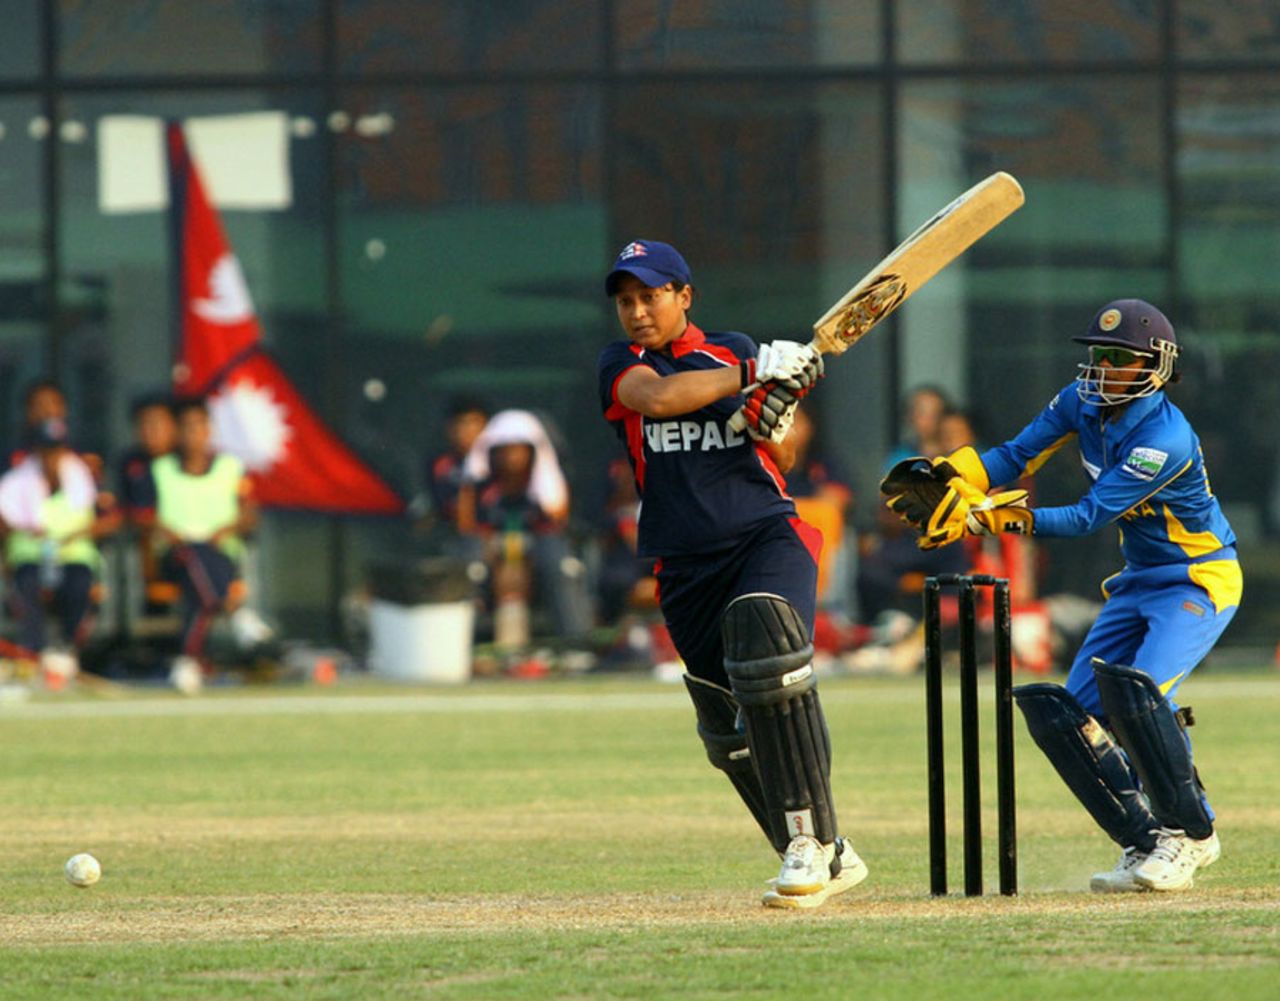 Action from the match between Nepal and Sri Lanka, ACC Women's T20 Asia Cup, Guangzhou, October 25, 2012